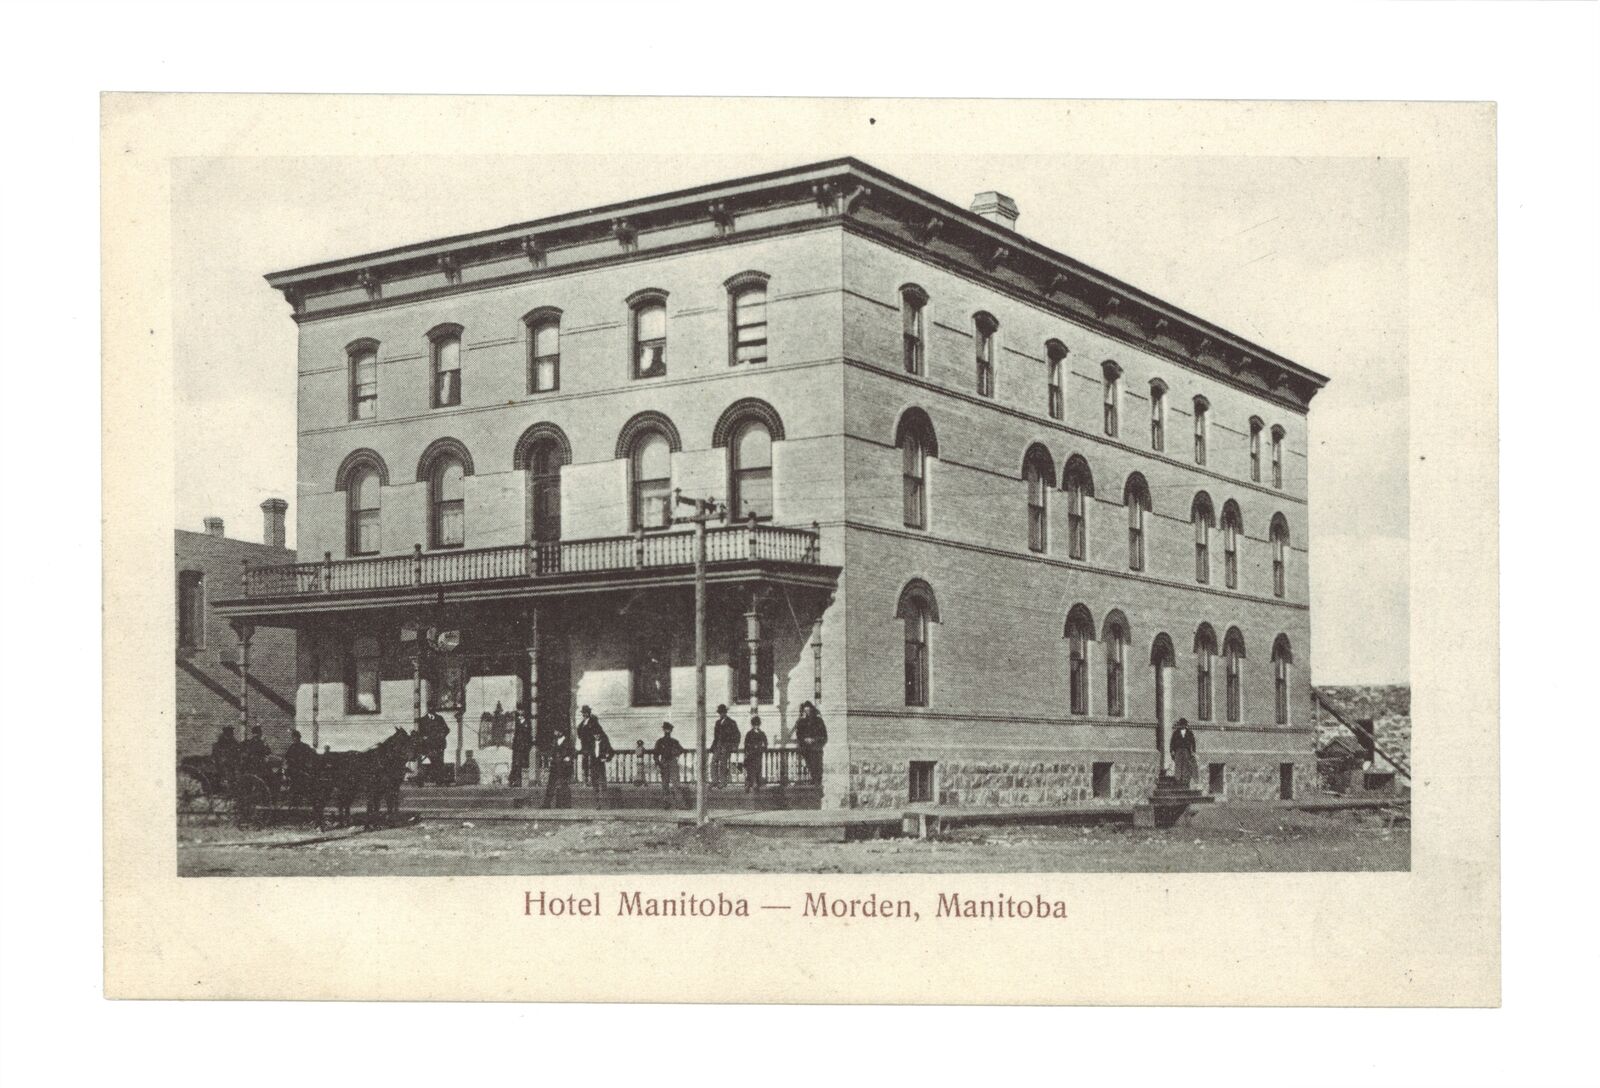 Hotel Manitoba - Morden Manitoba - Exterior of hotel with guests o- Old Photo